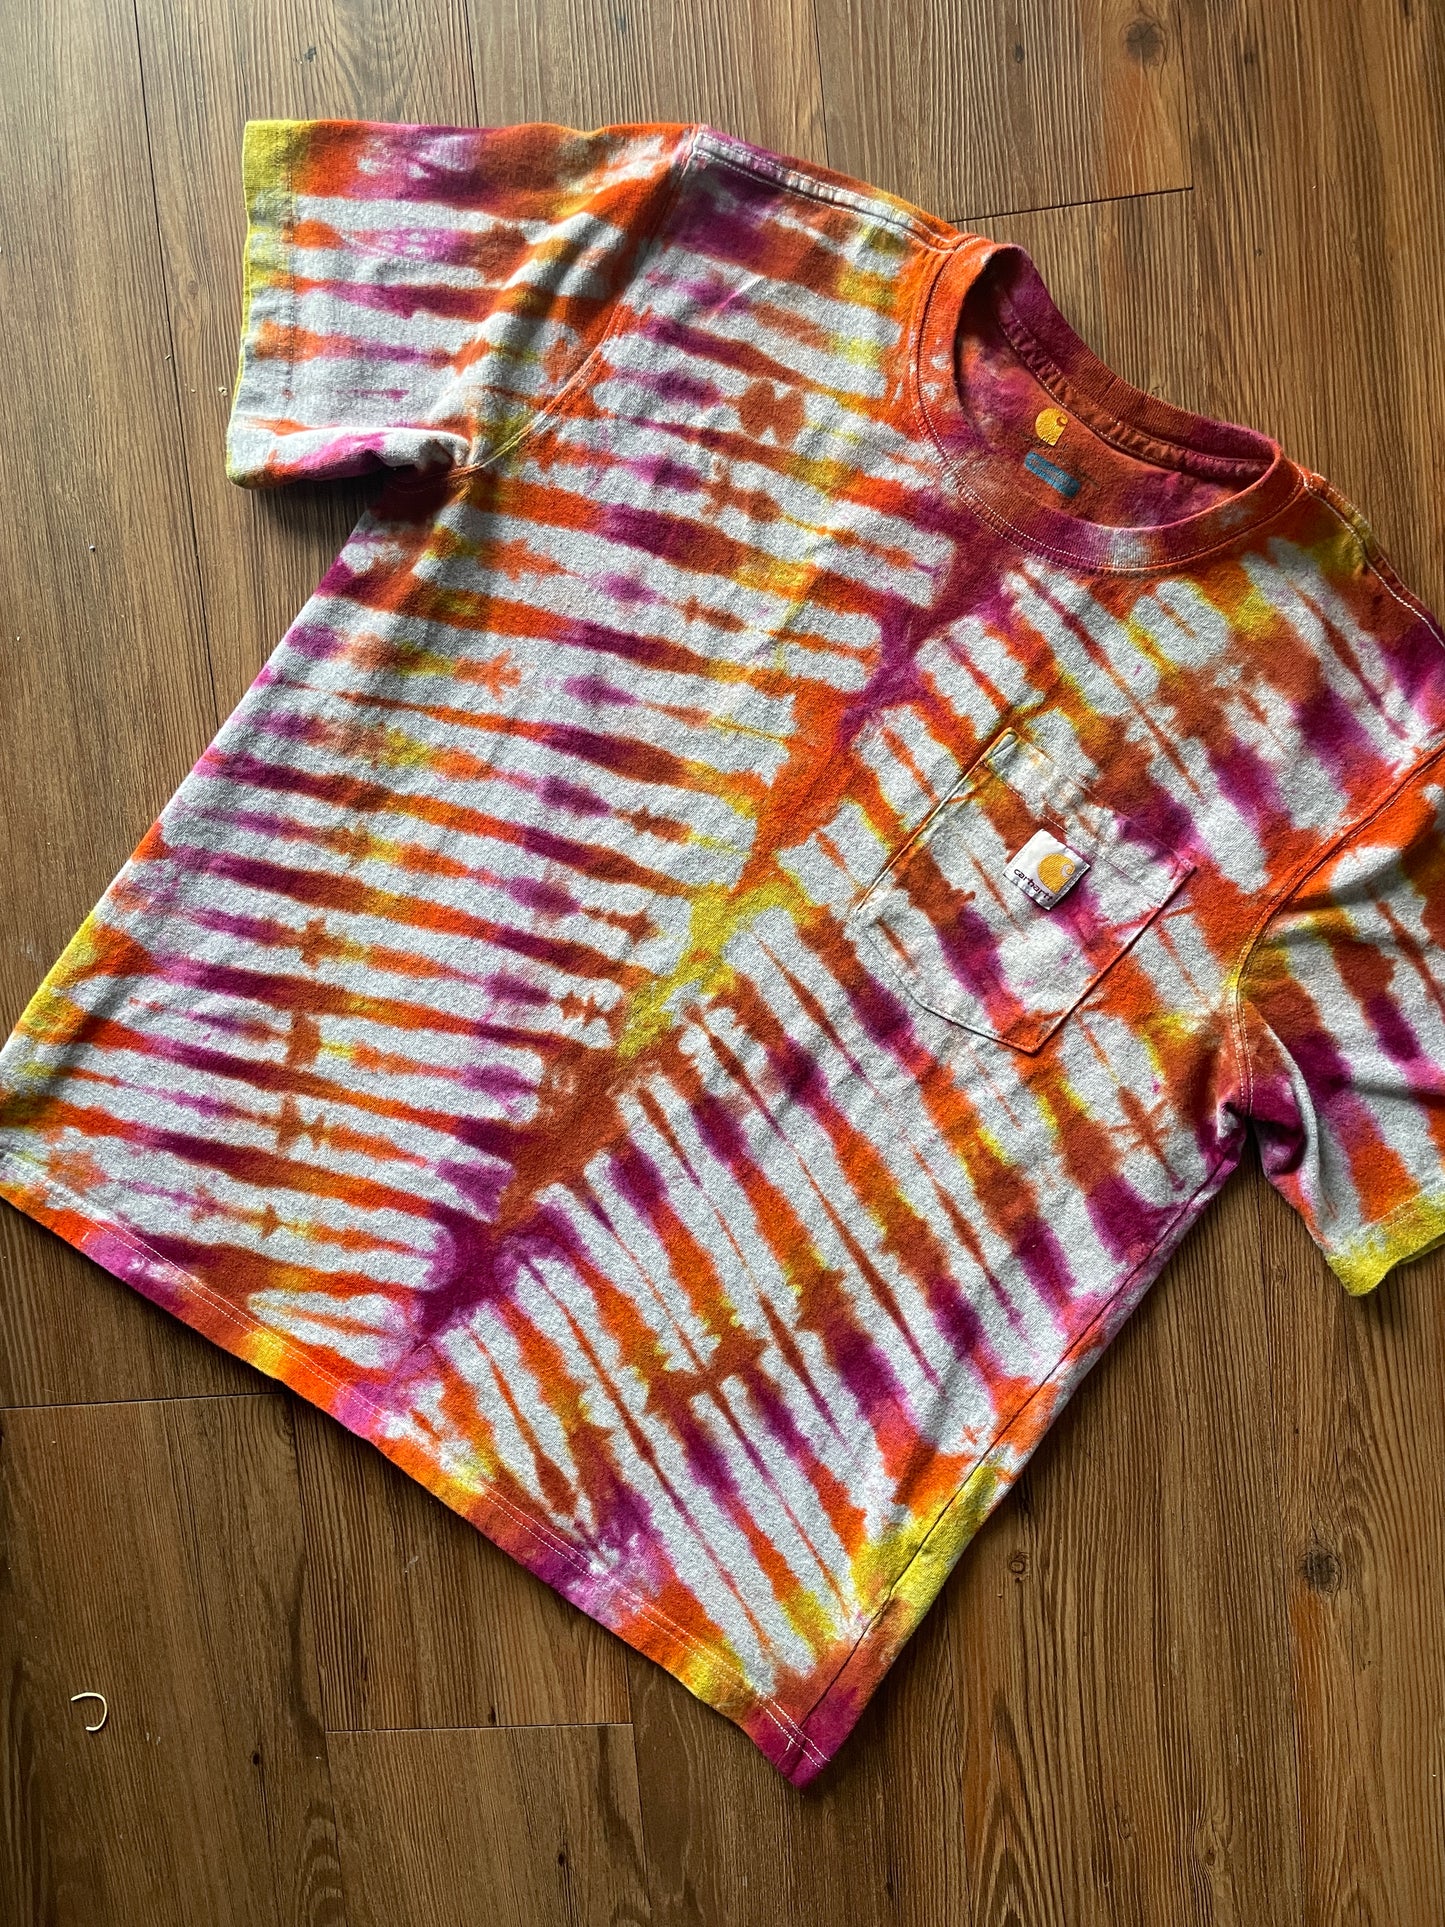 LARGE Men’s Carhartt Relaxed Fit Handmade Tie Dye T-Shirt | One-Of-a-Kind Orange and Pink Short Sleeve